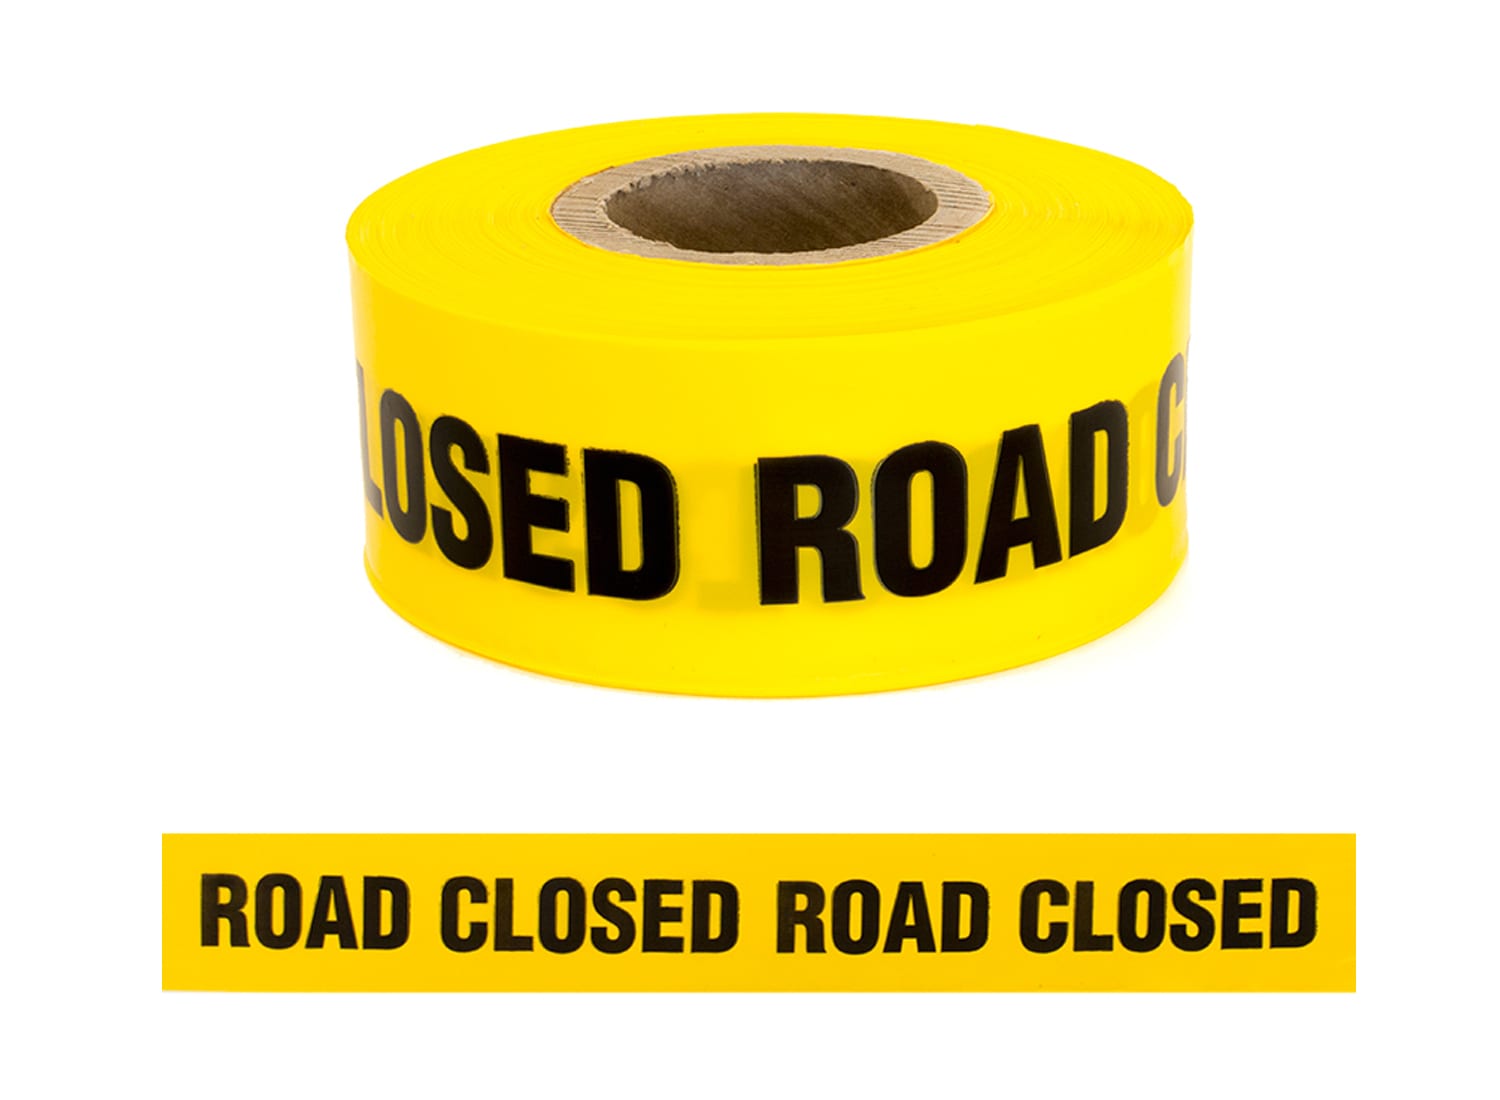 Safety Warning Tape - "Road Closed"